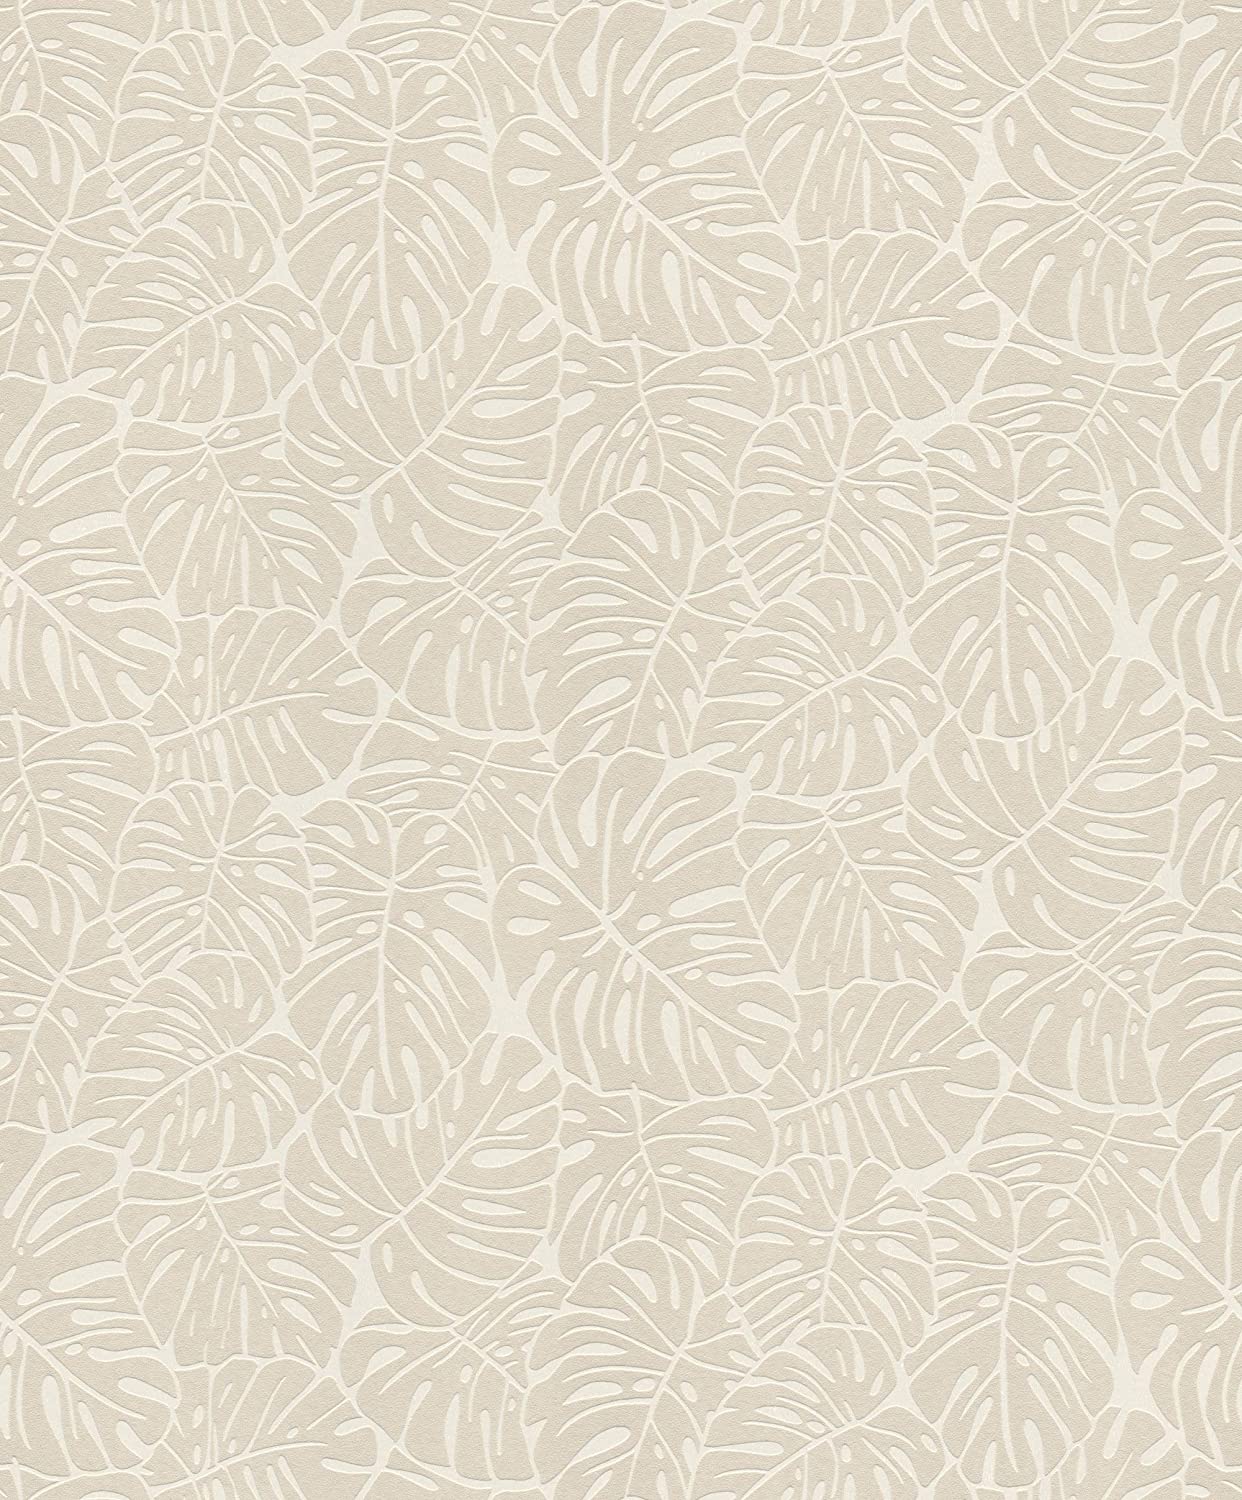 Rasch Wallpaper with White and Beige leaves